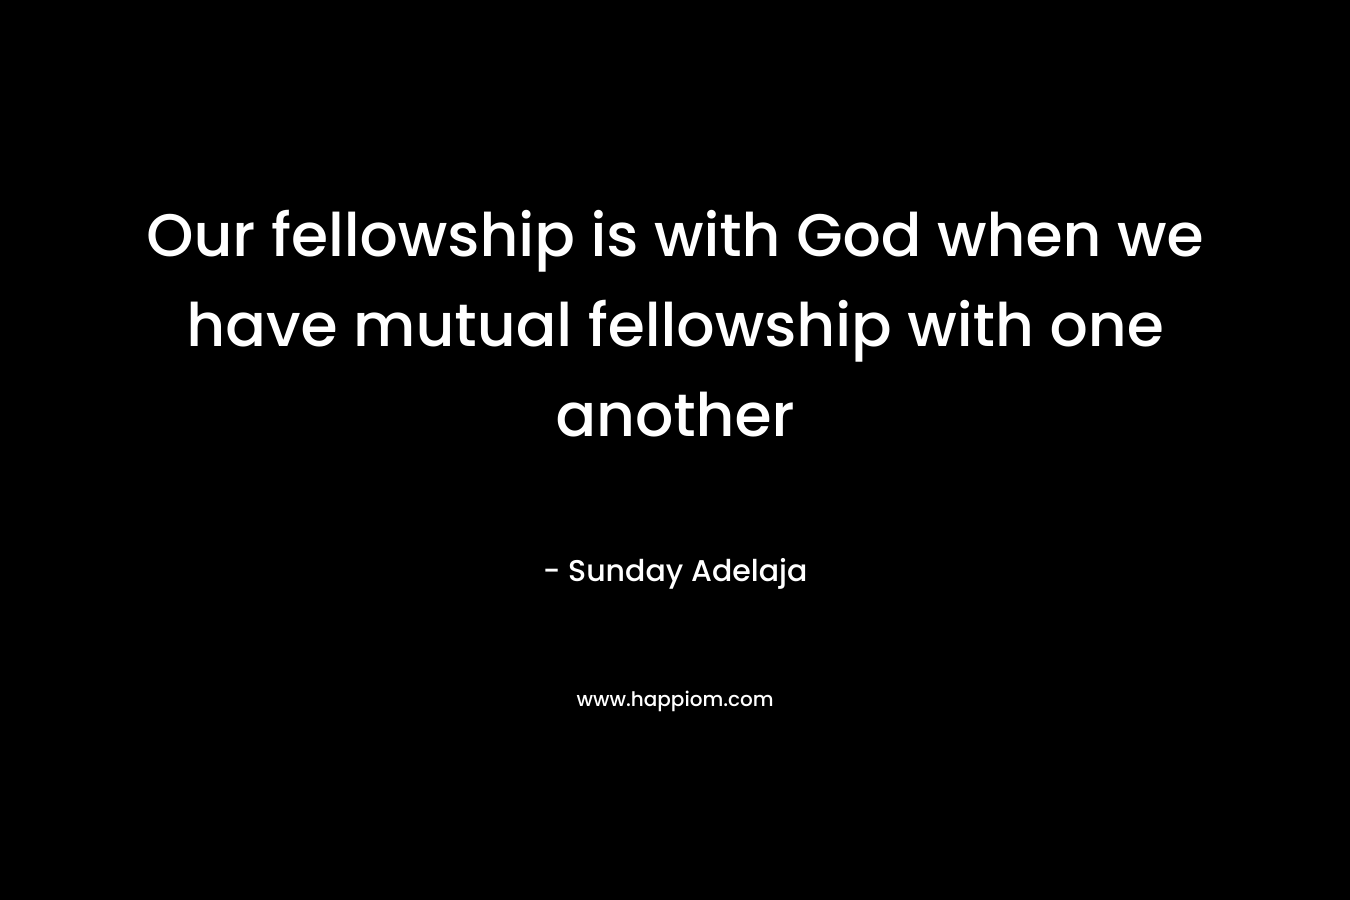 Our fellowship is with God when we have mutual fellowship with one another